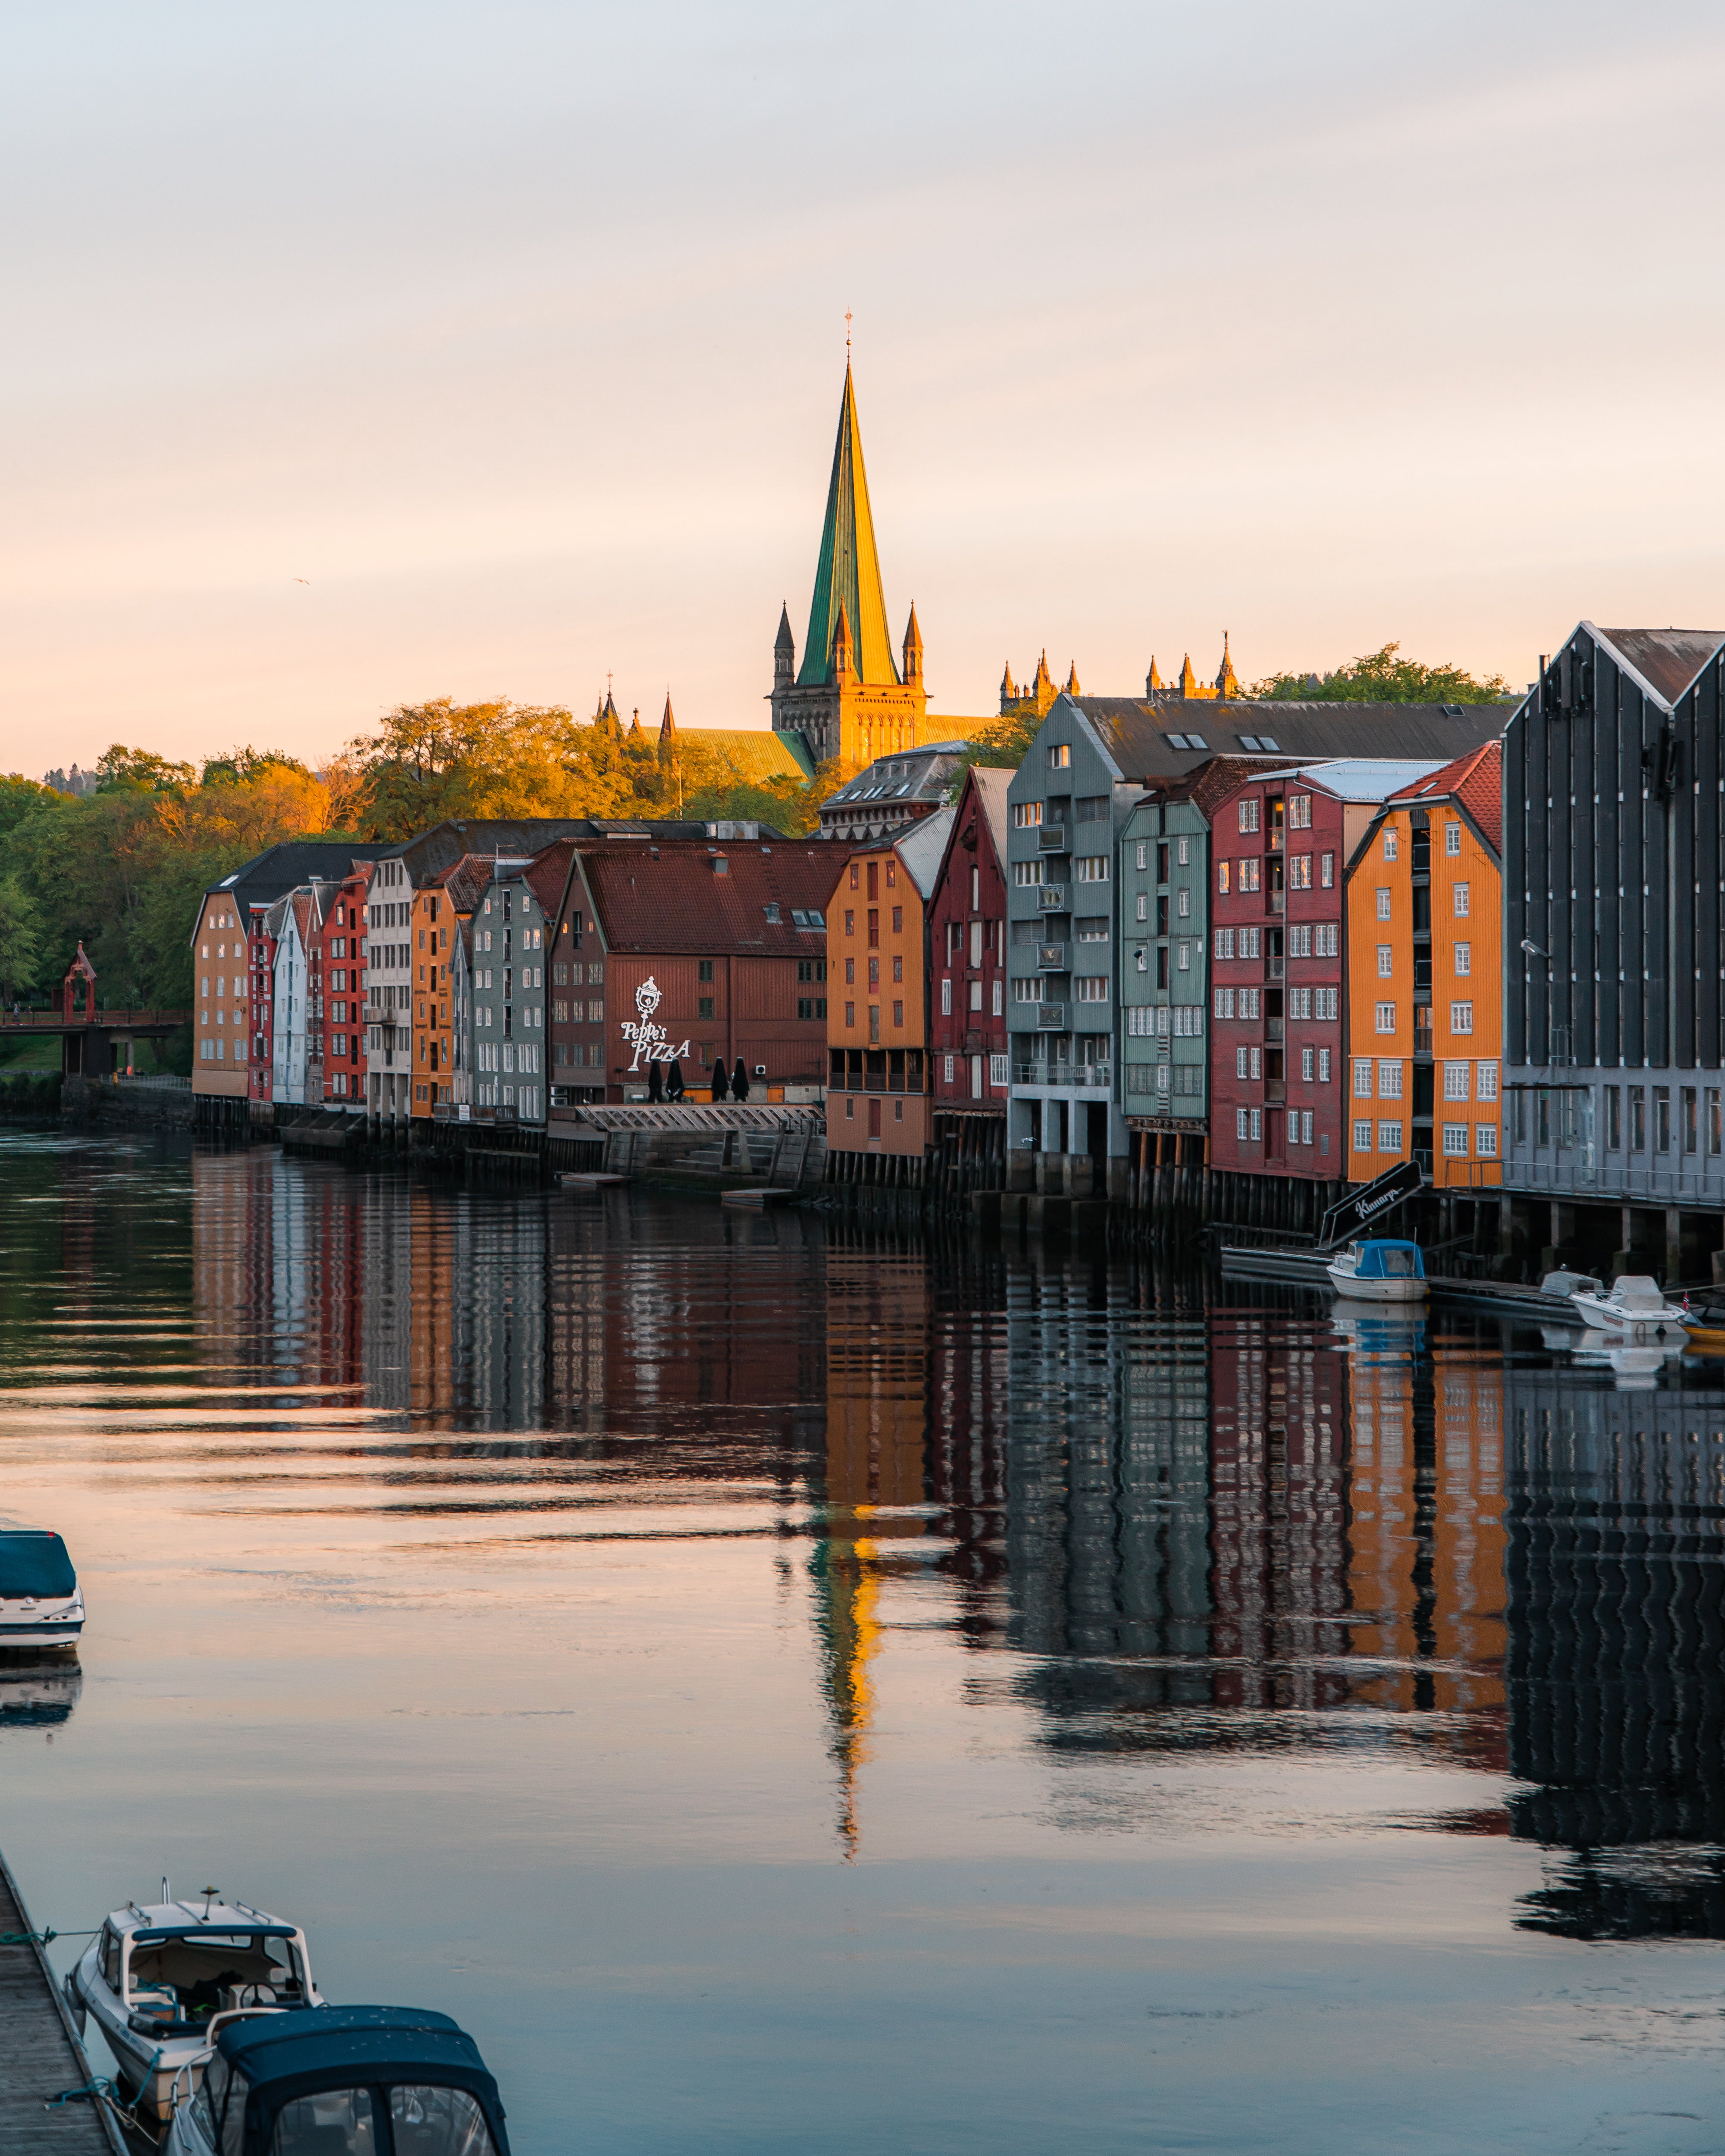 Trondheim is Norway’s third largest city with a population of around 210,000